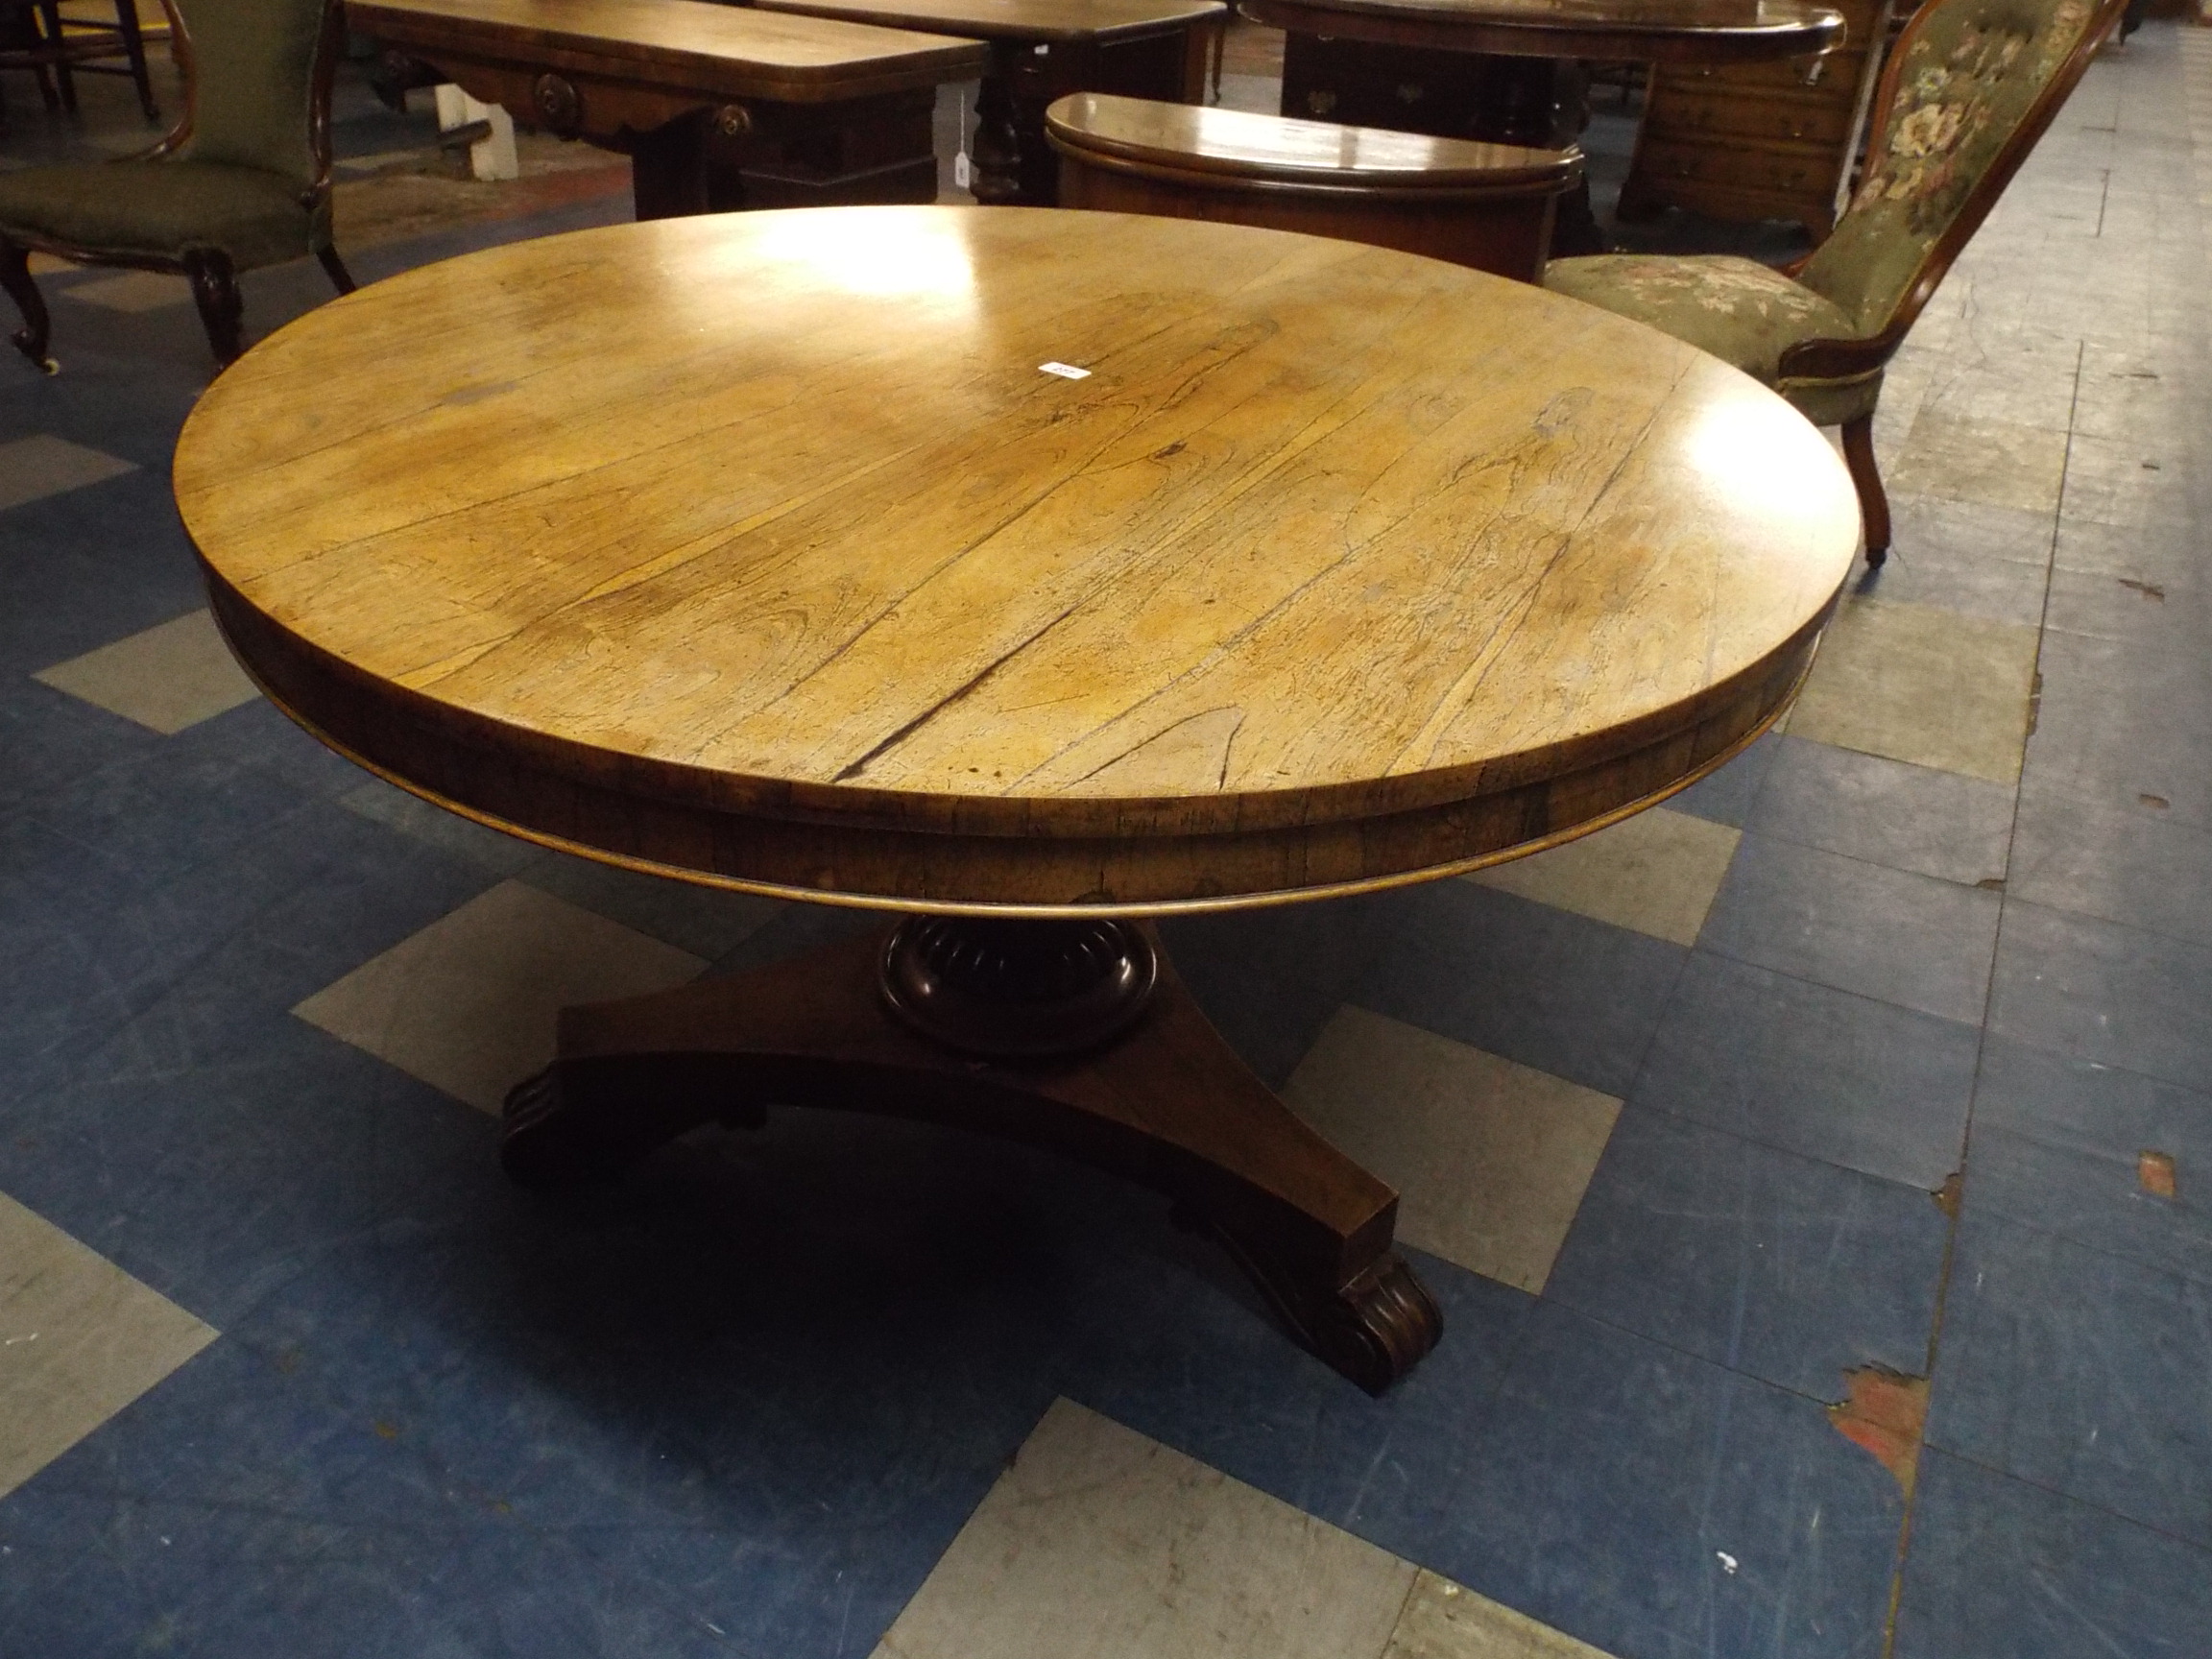 A 19th Century Rosewood Circular Breakfast Table with Triform Base and Scrolled Feet.